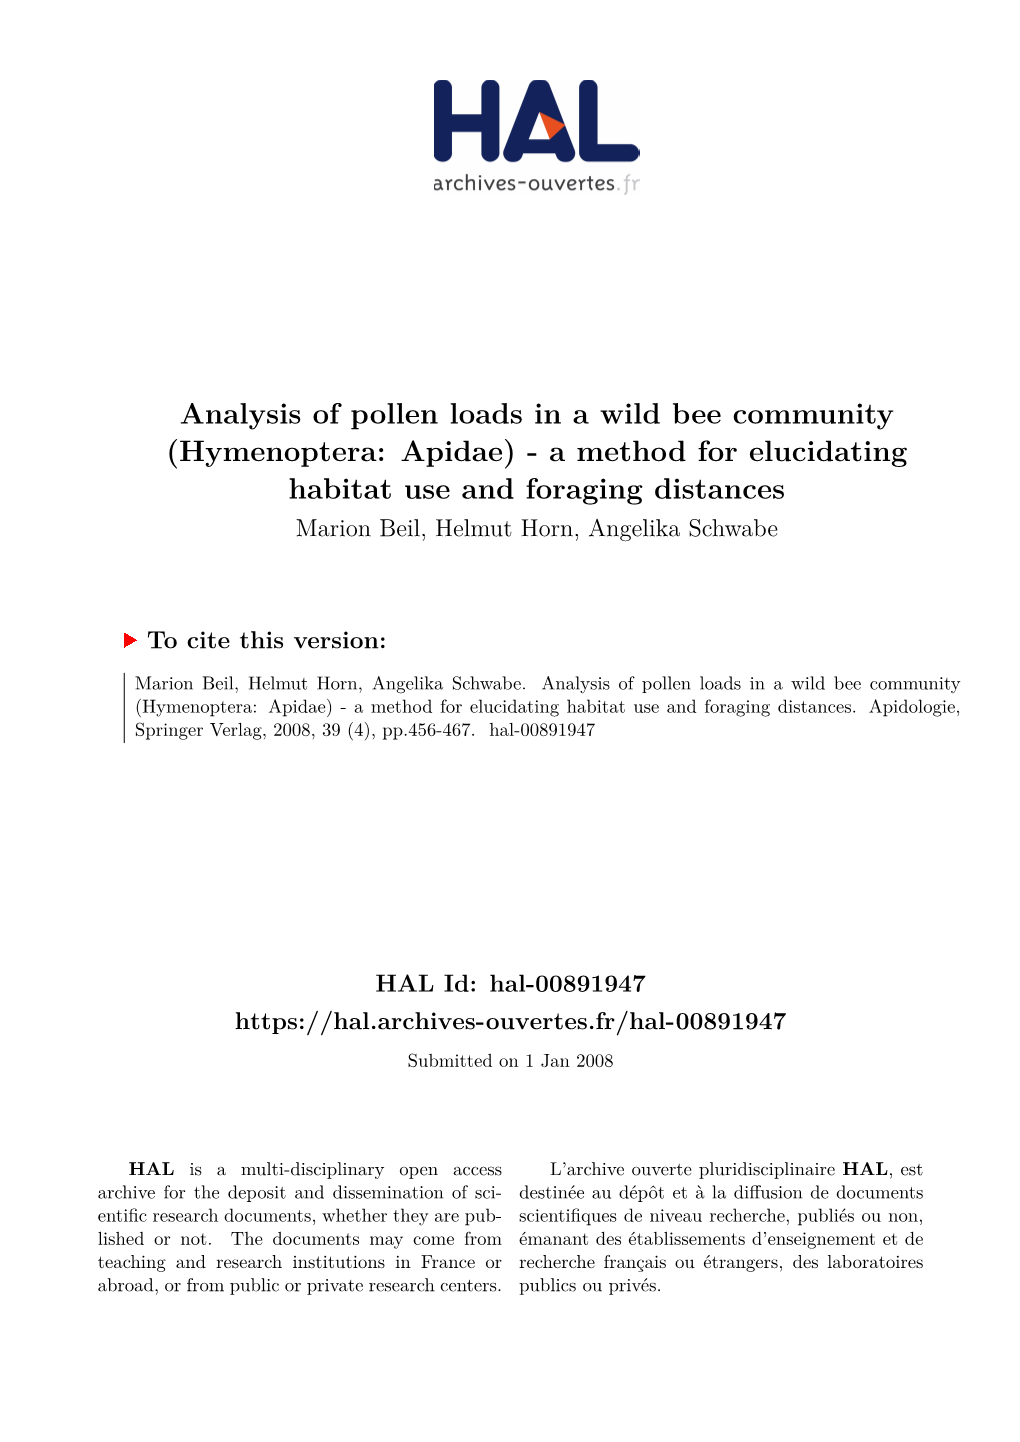 Analysis of Pollen Loads in a Wild Bee Community